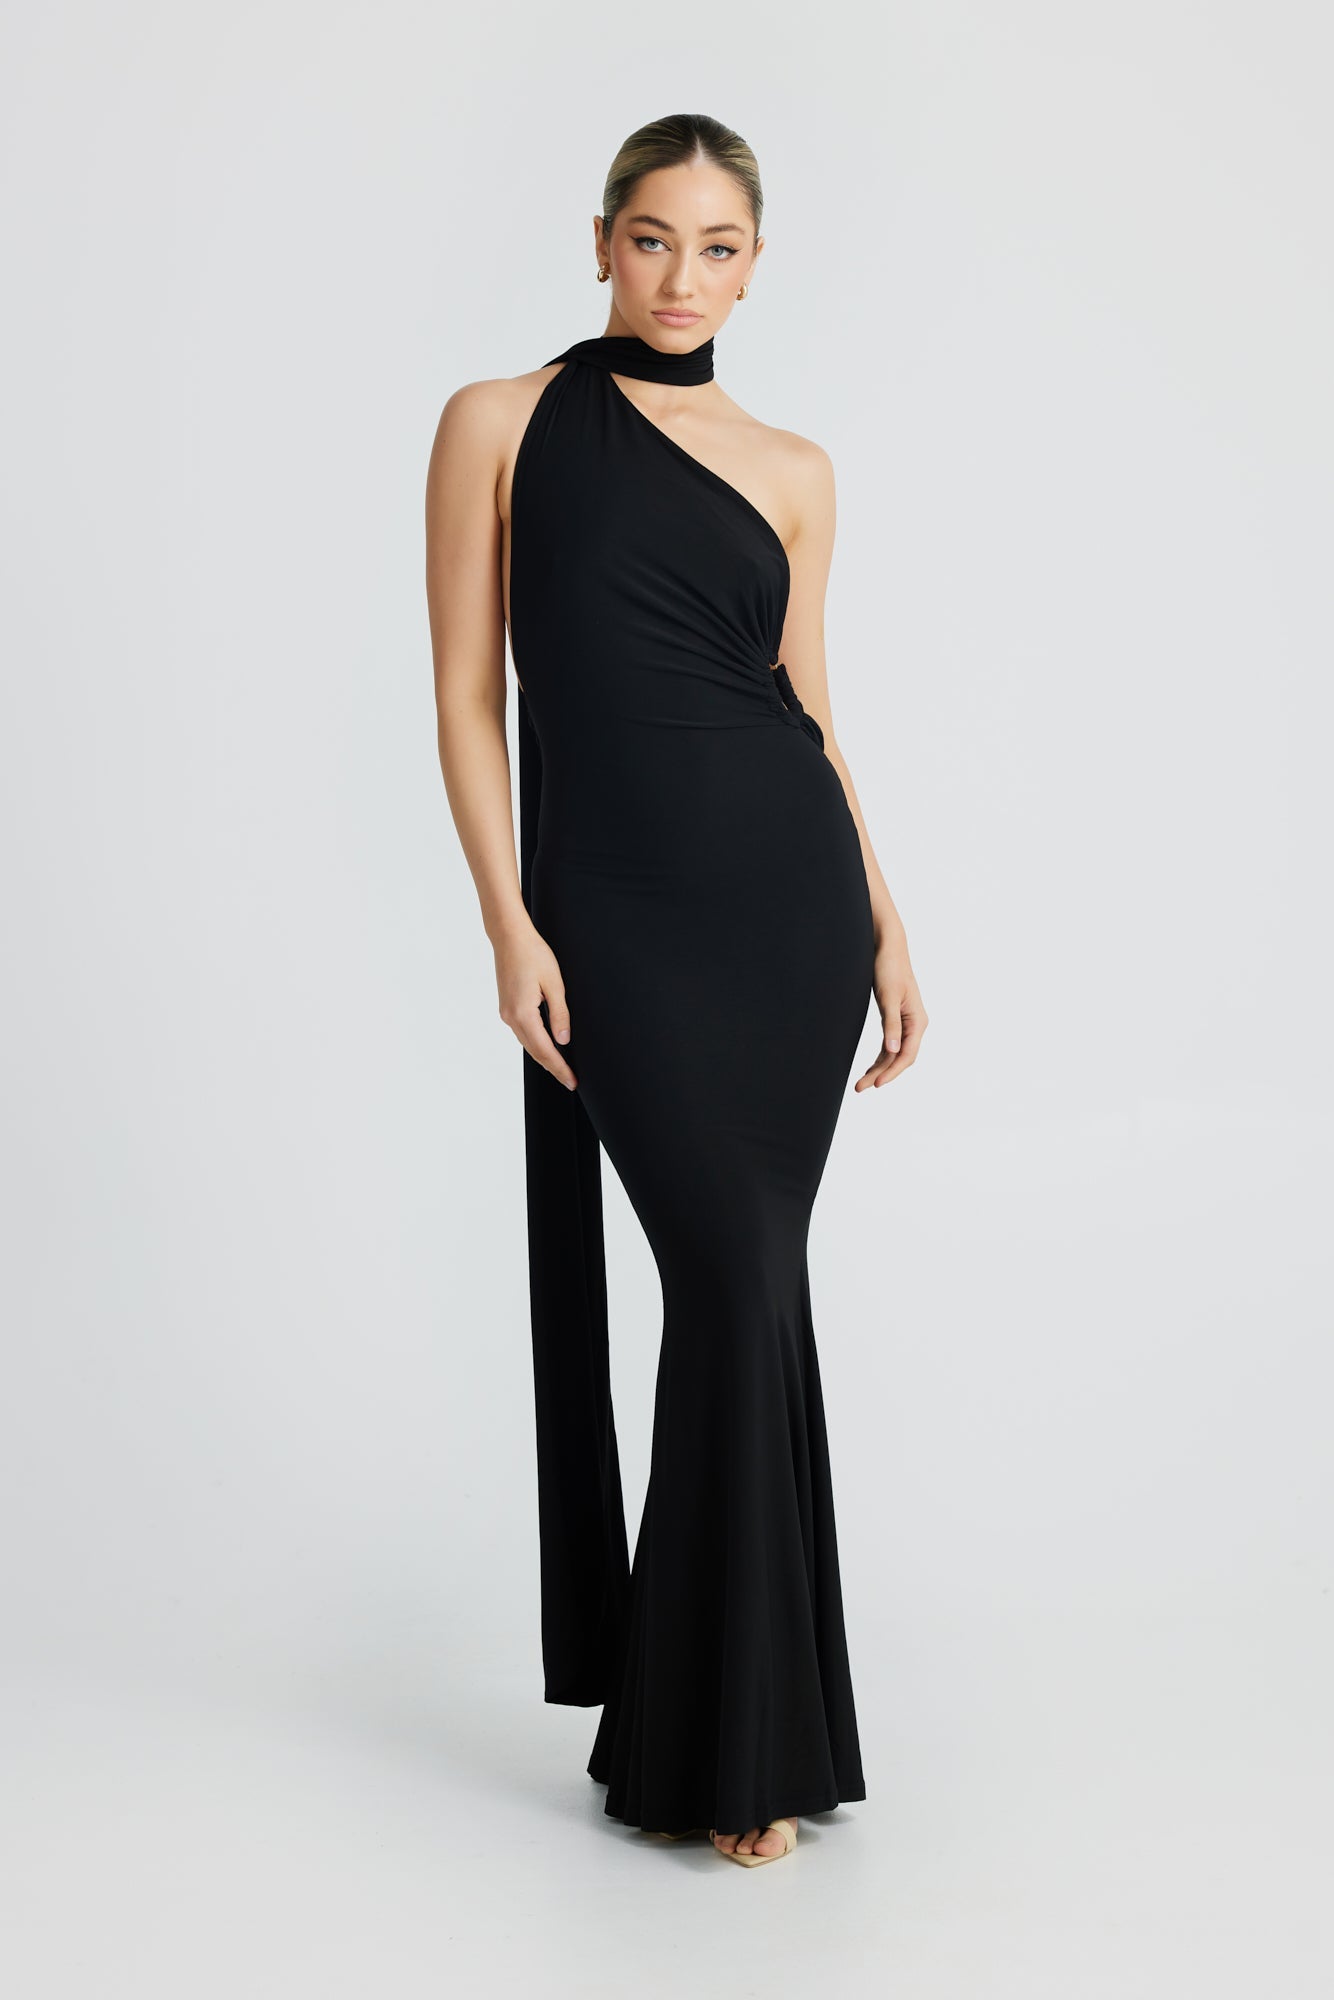 MÉLANI The Label SOFIA Black Asymmetric Backless Form Fitted Dress